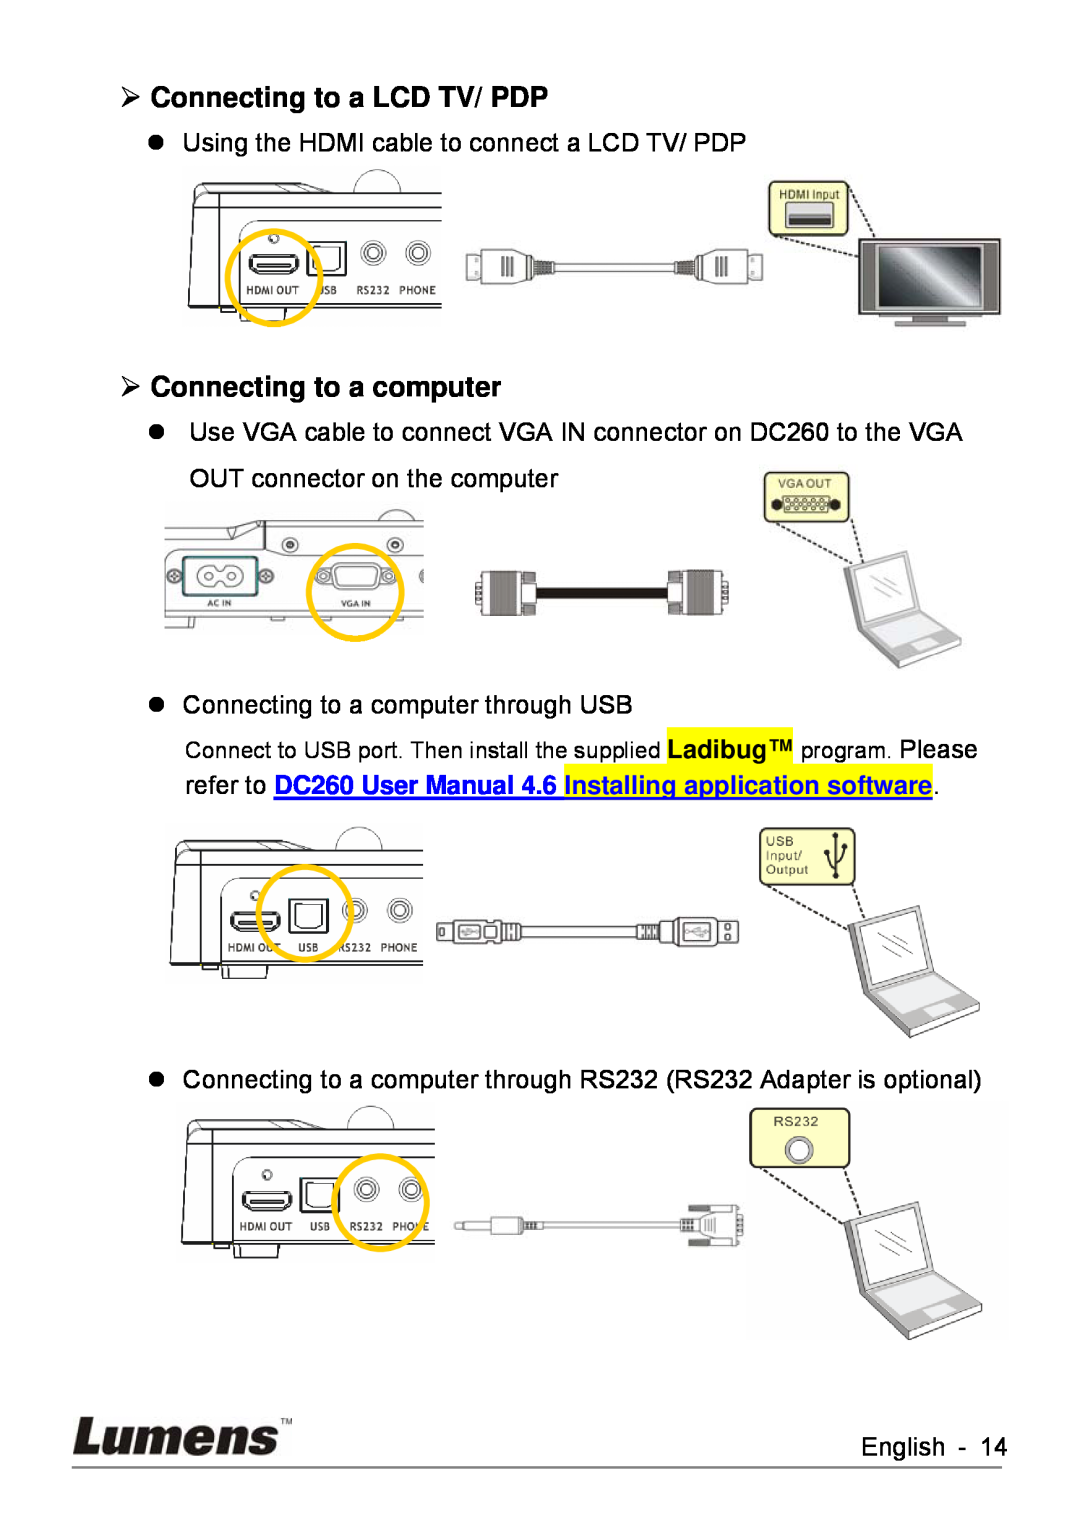 Lumens Technology DC260 user manual ¾ Connecting to a LCD TV/ PDP, ¾ Connecting to a computer 